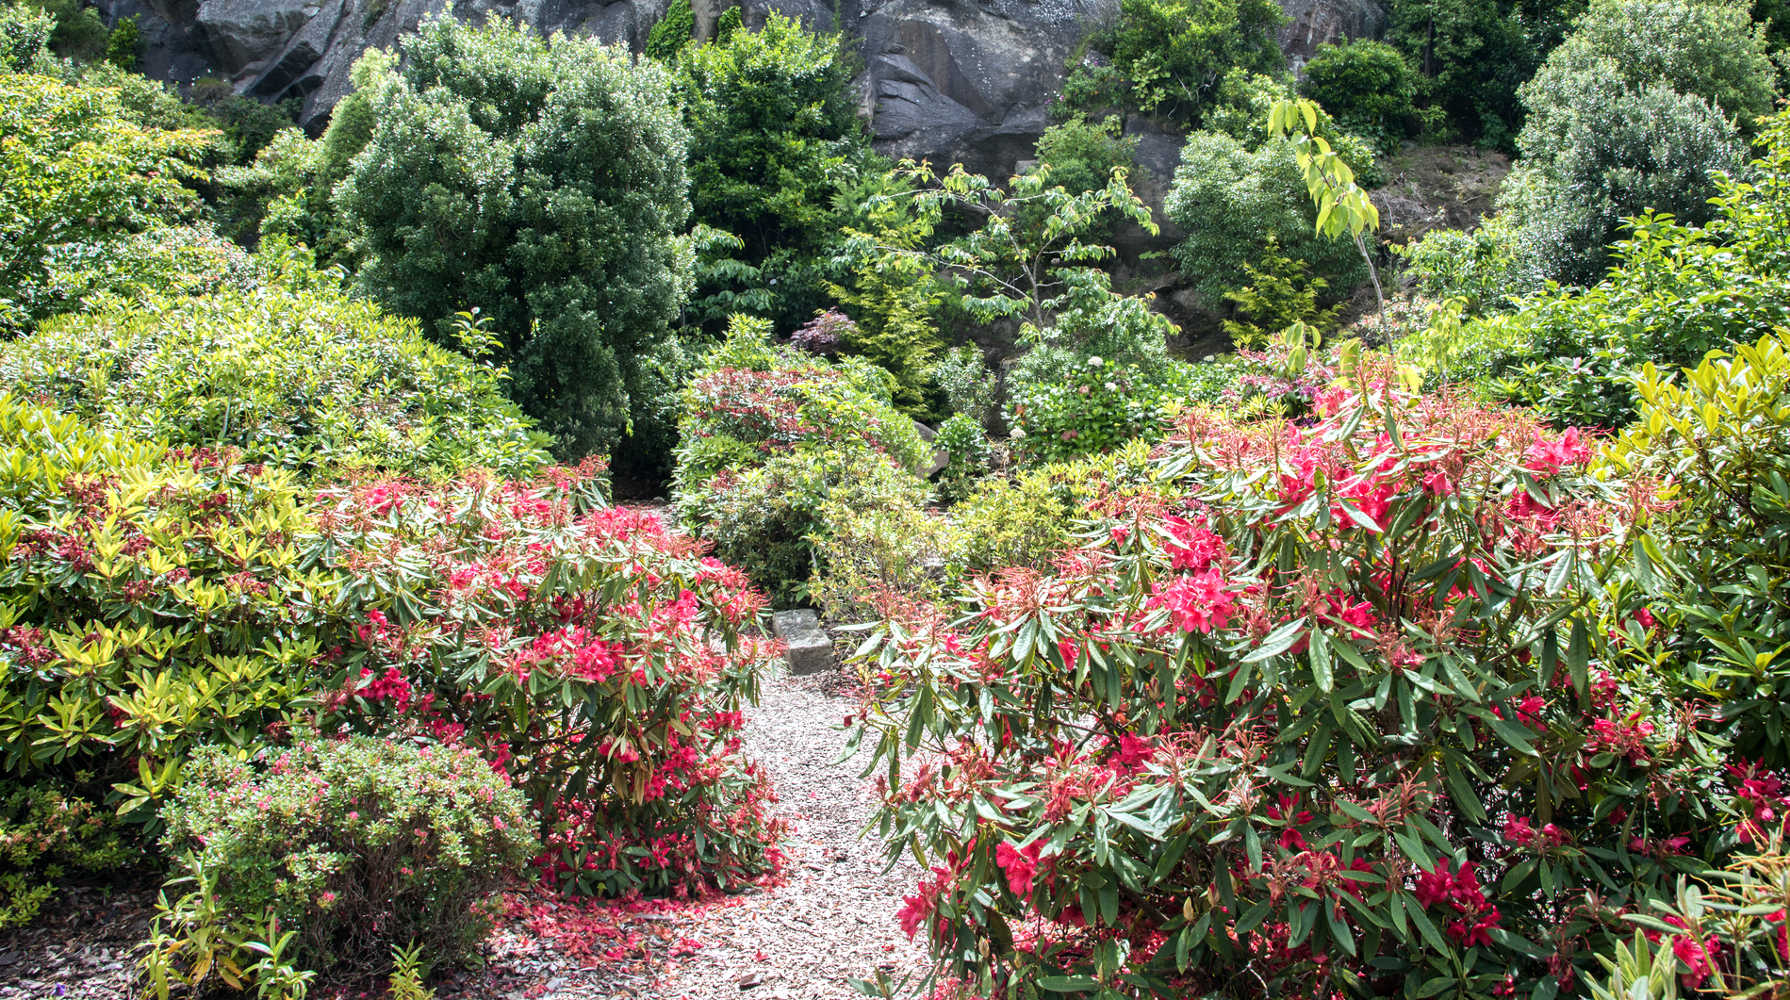 Fresh summer growth in the Lady Thorn Rhododendron dell, free public garden, with rock face in Dunedin, New Zealand